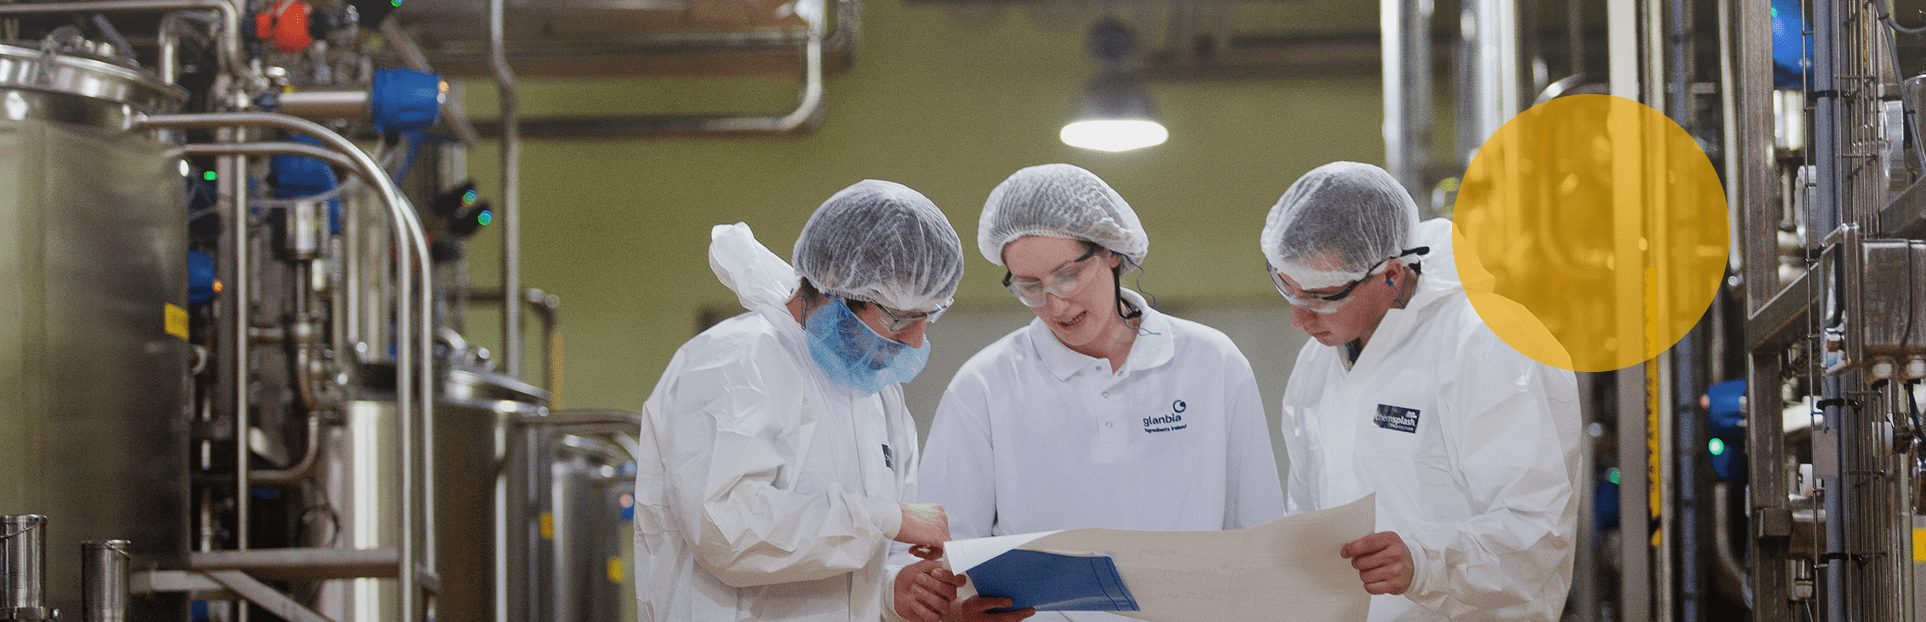 GN employees in cheese plant 